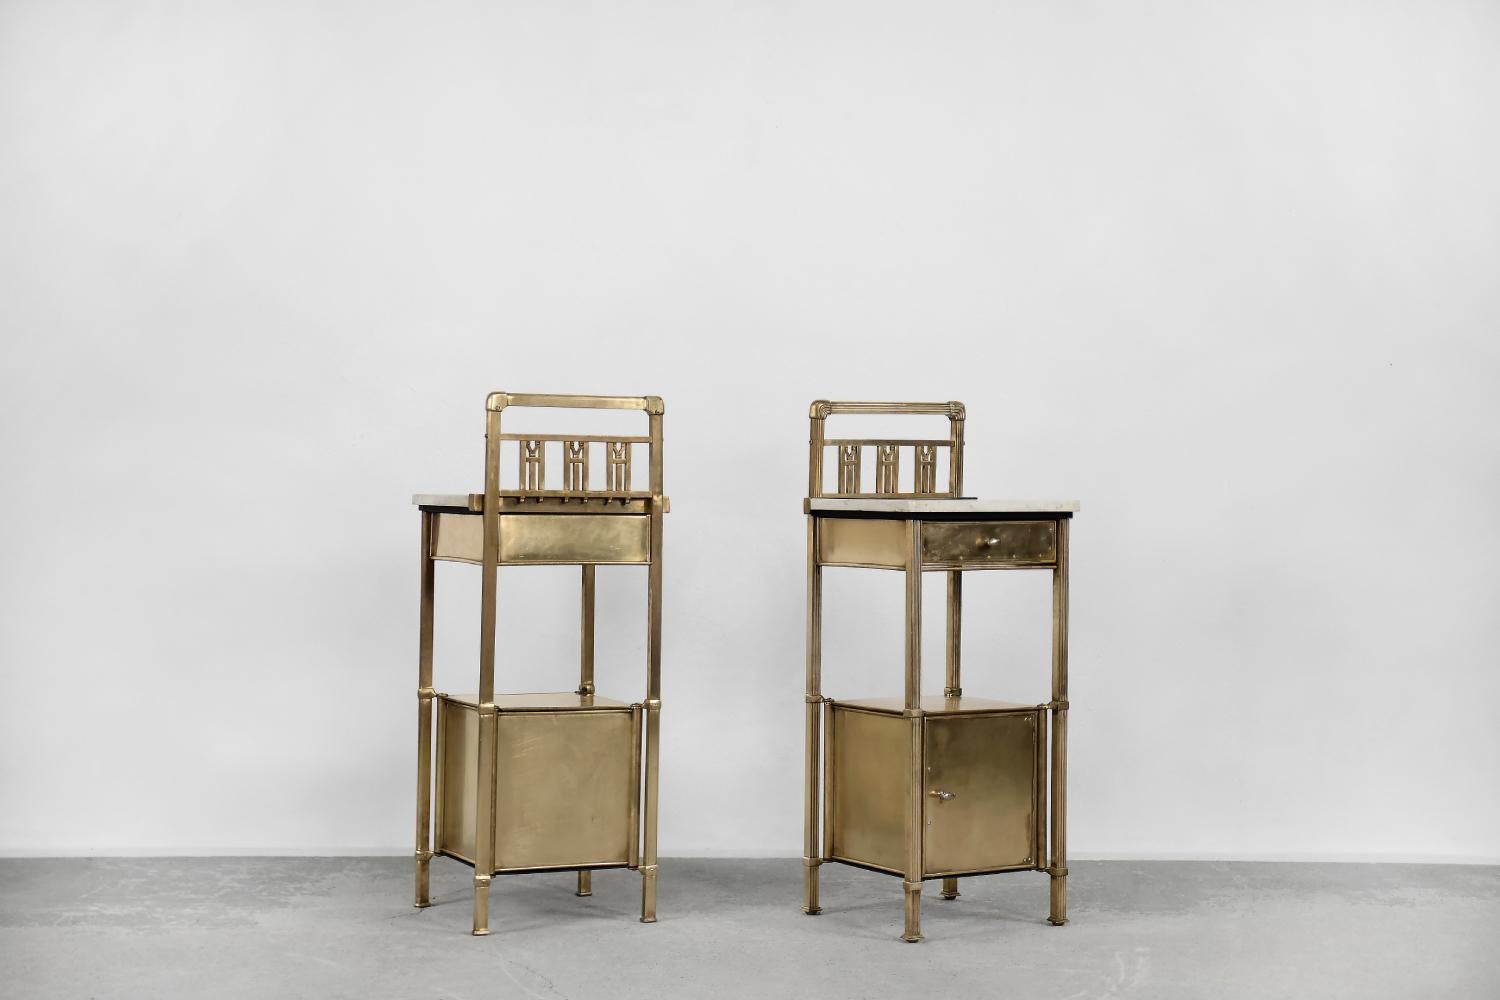 This set of two rare bedside tables was manufactured in Warsaw by the famous Polish factory - 'Zaklad Wyrobów Metalowych Konrad, Jarnuszkiewicz i S-ka'. This set was created at the turn of the 19th and 20th centuries. They are made of solid brass